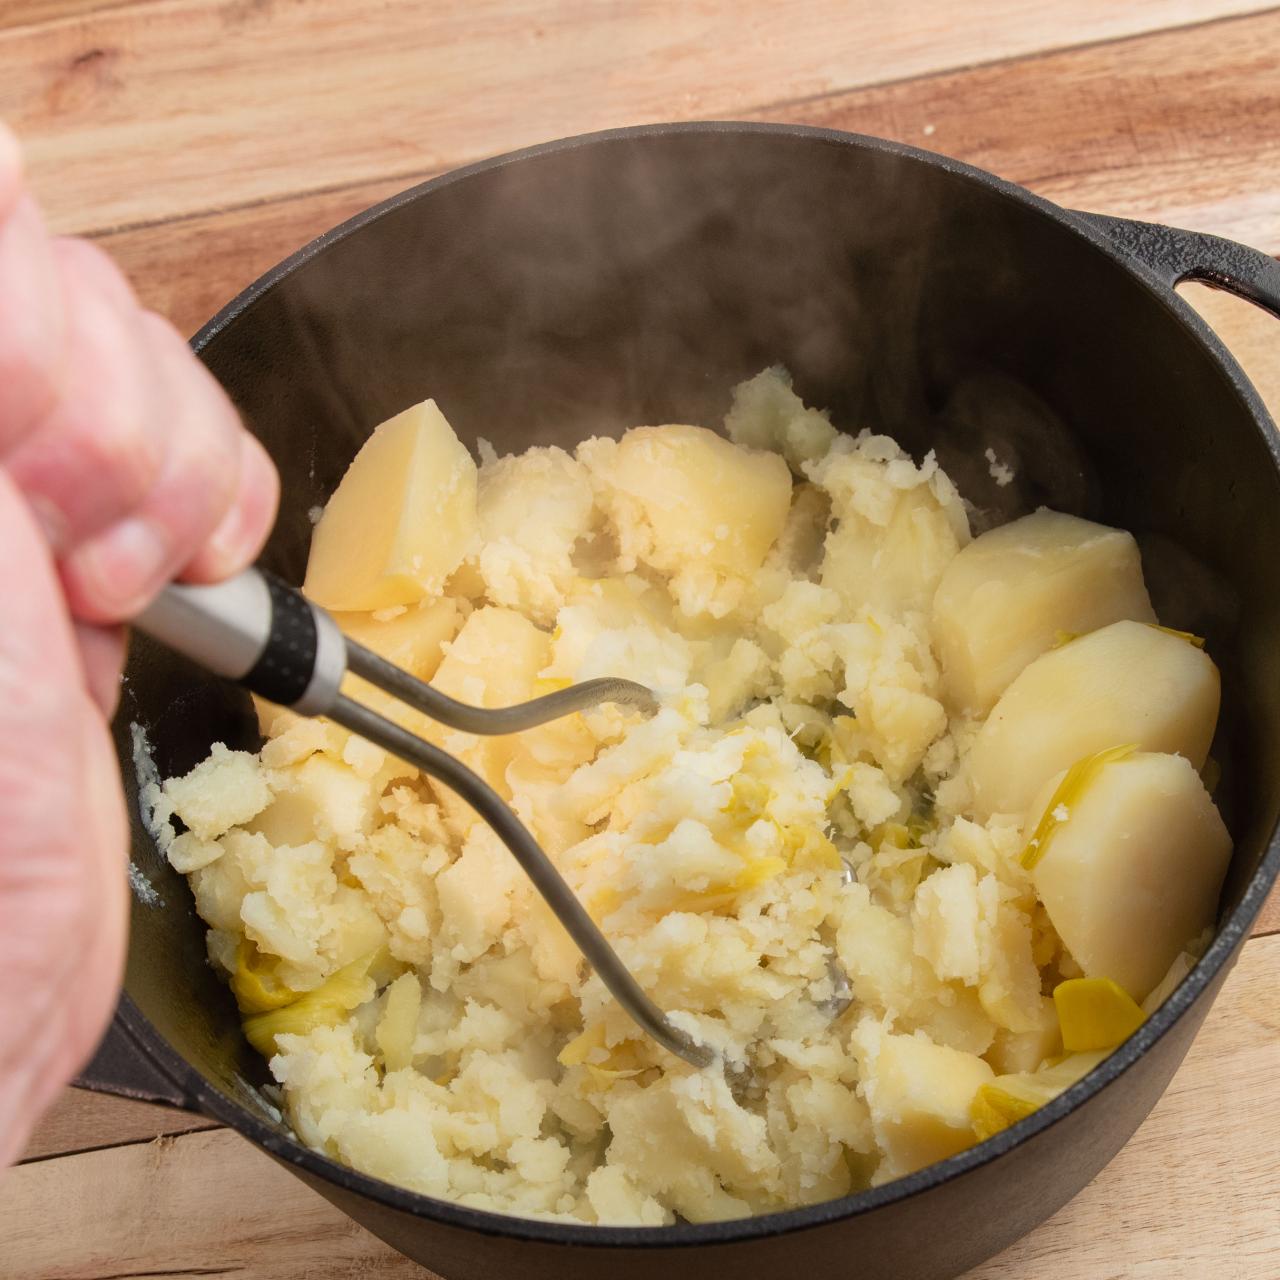 Use Your Potato Masher To Break Up Ground Meat in the Skillet